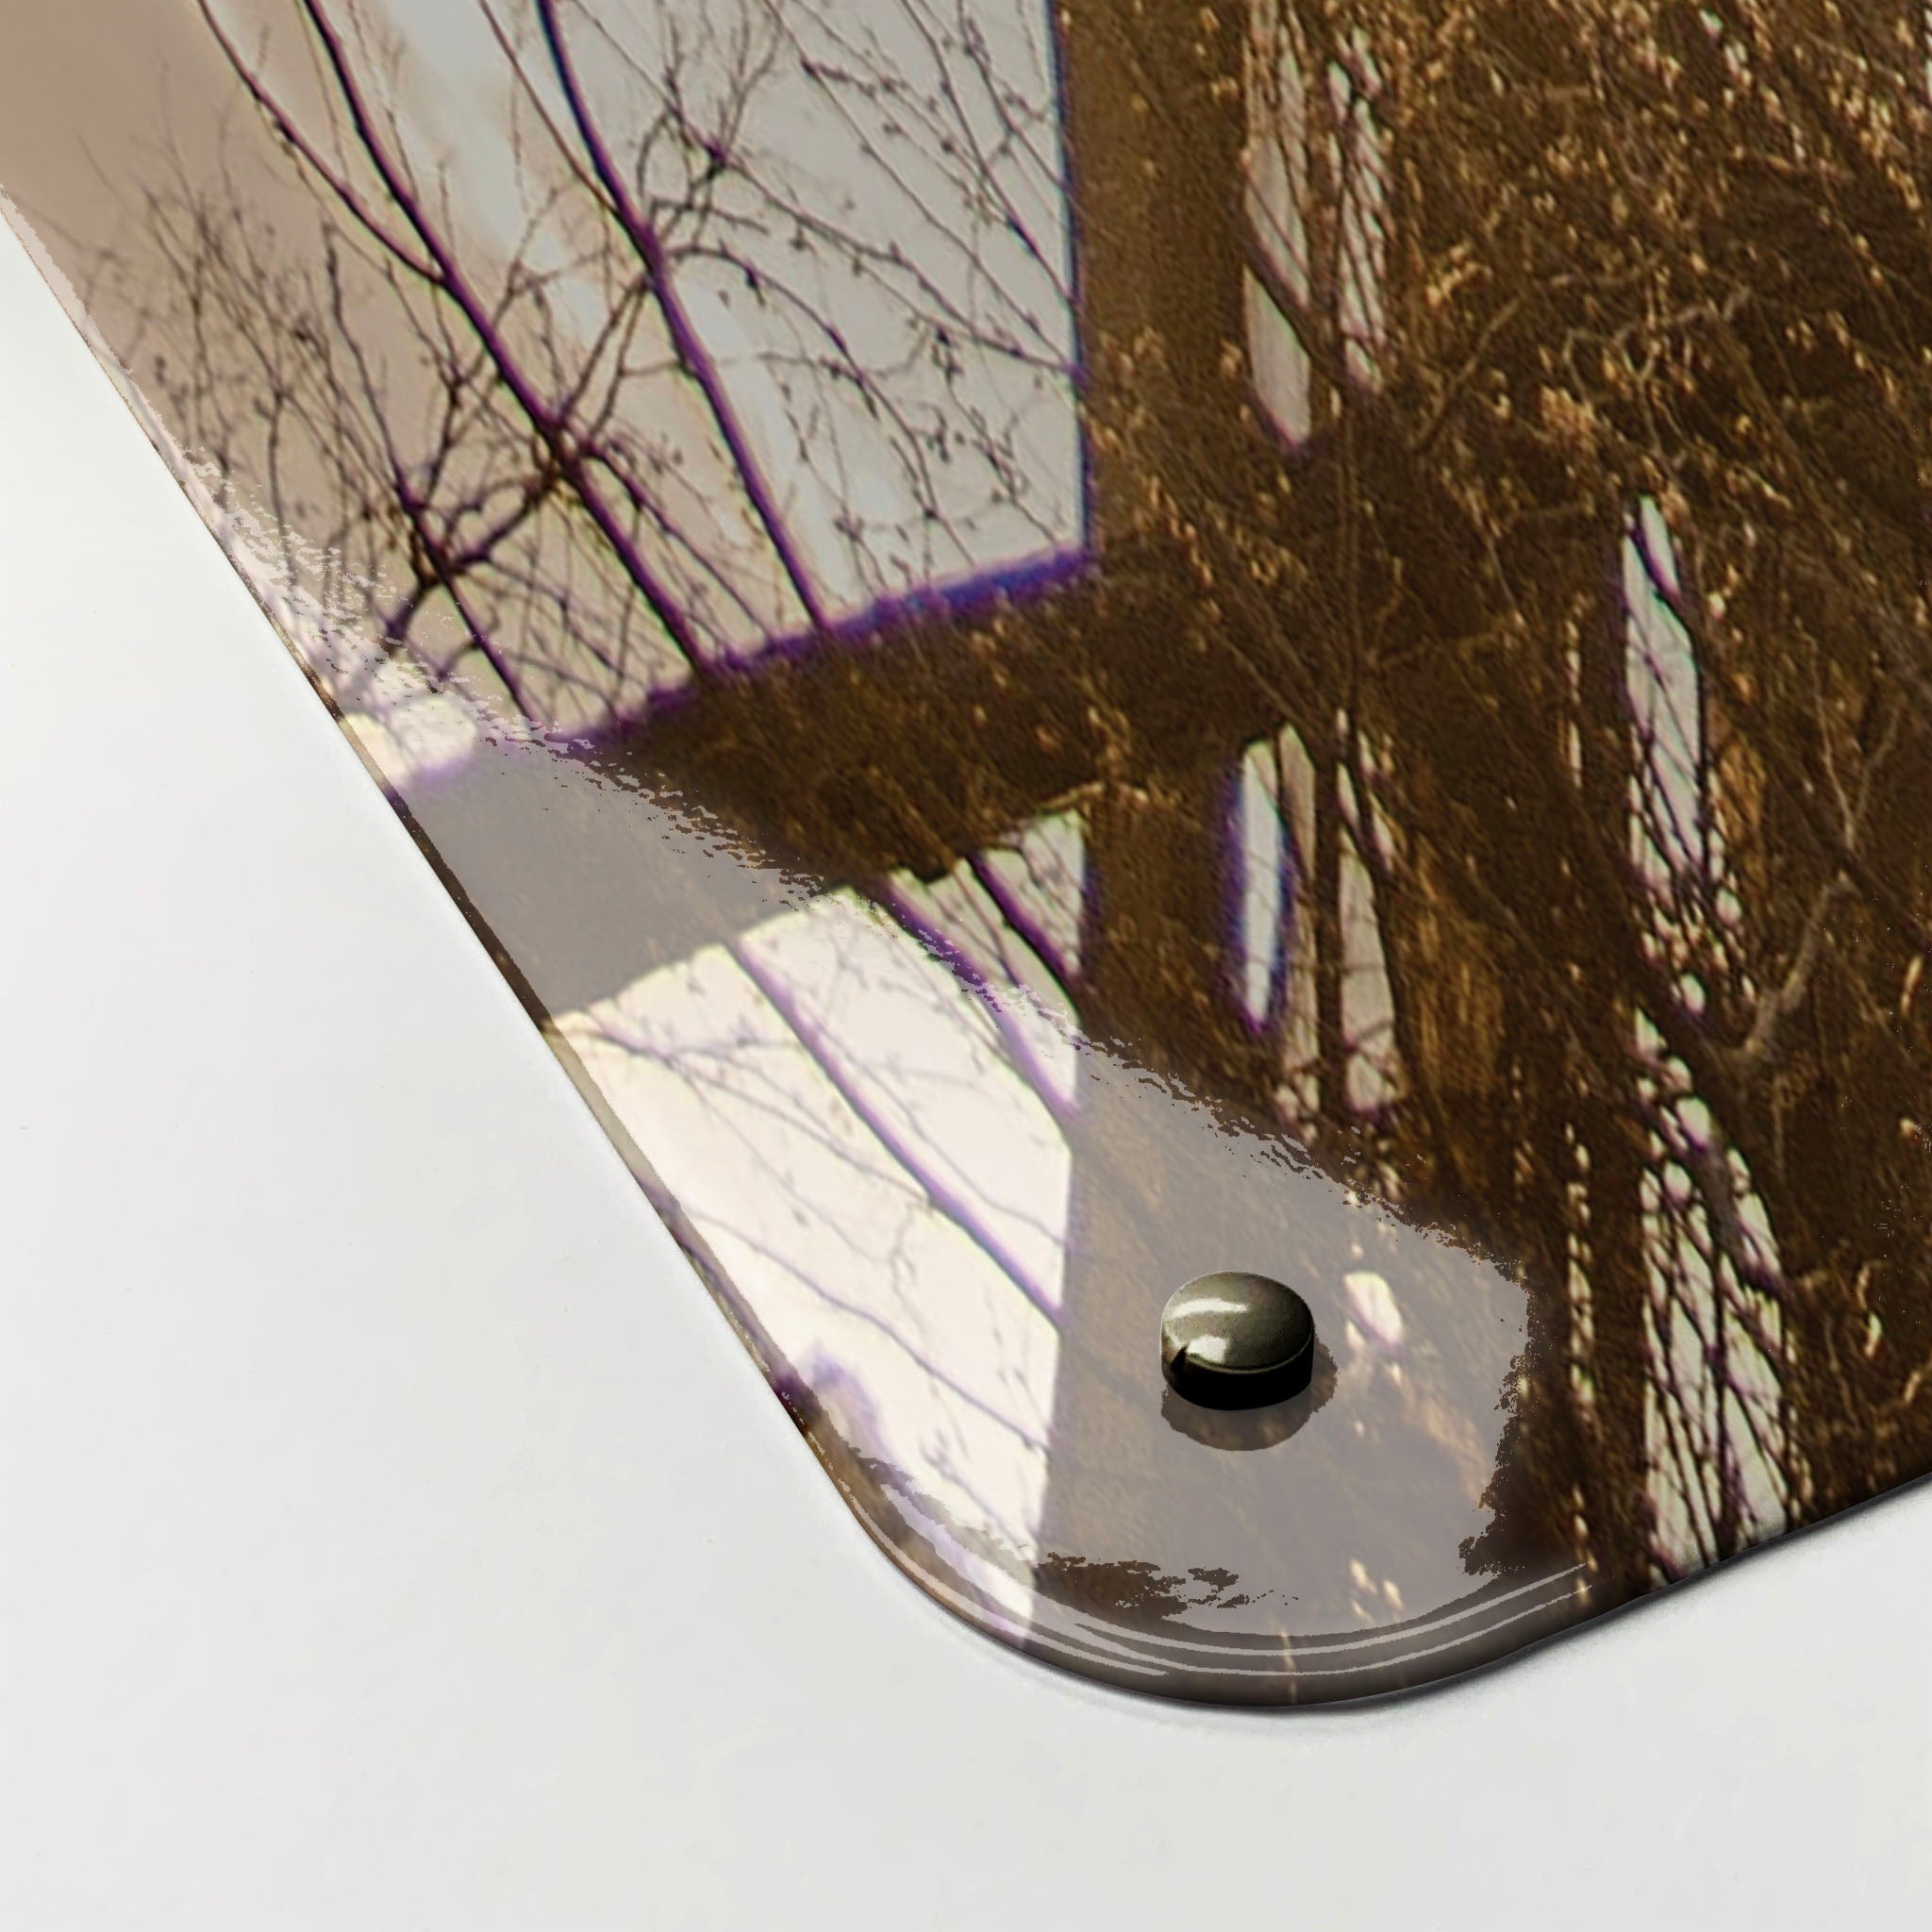 The corner detail of an Eiffel Tower photographic magnetic board to show it’s high gloss surface